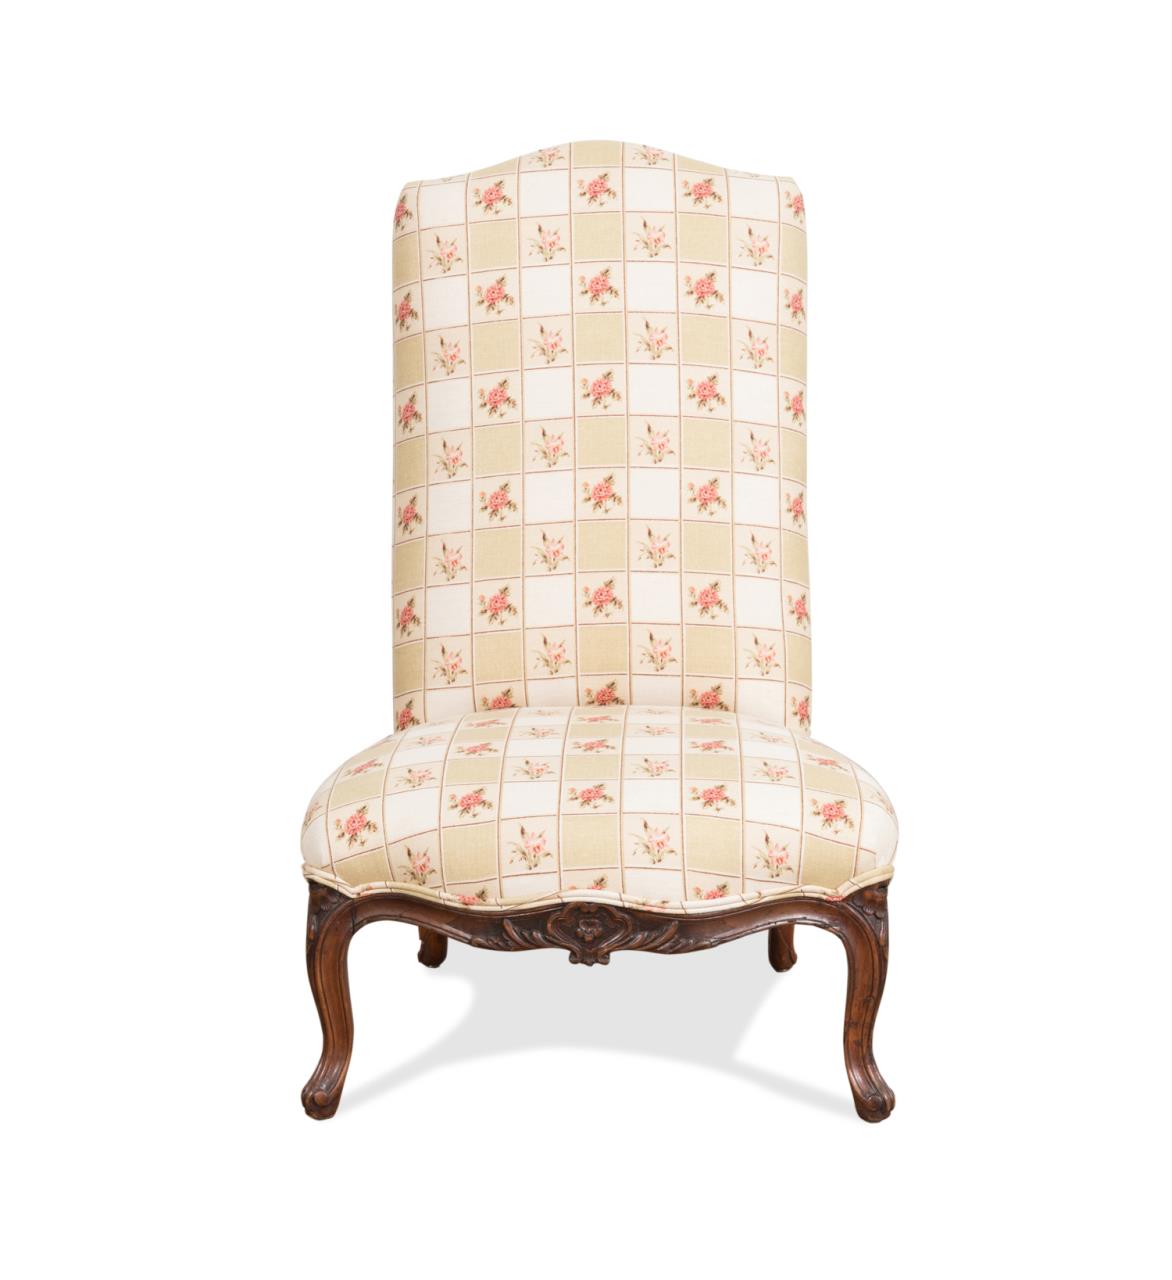 LOUIS XV STYLE UPHOLSTERED LOW 2f98d3